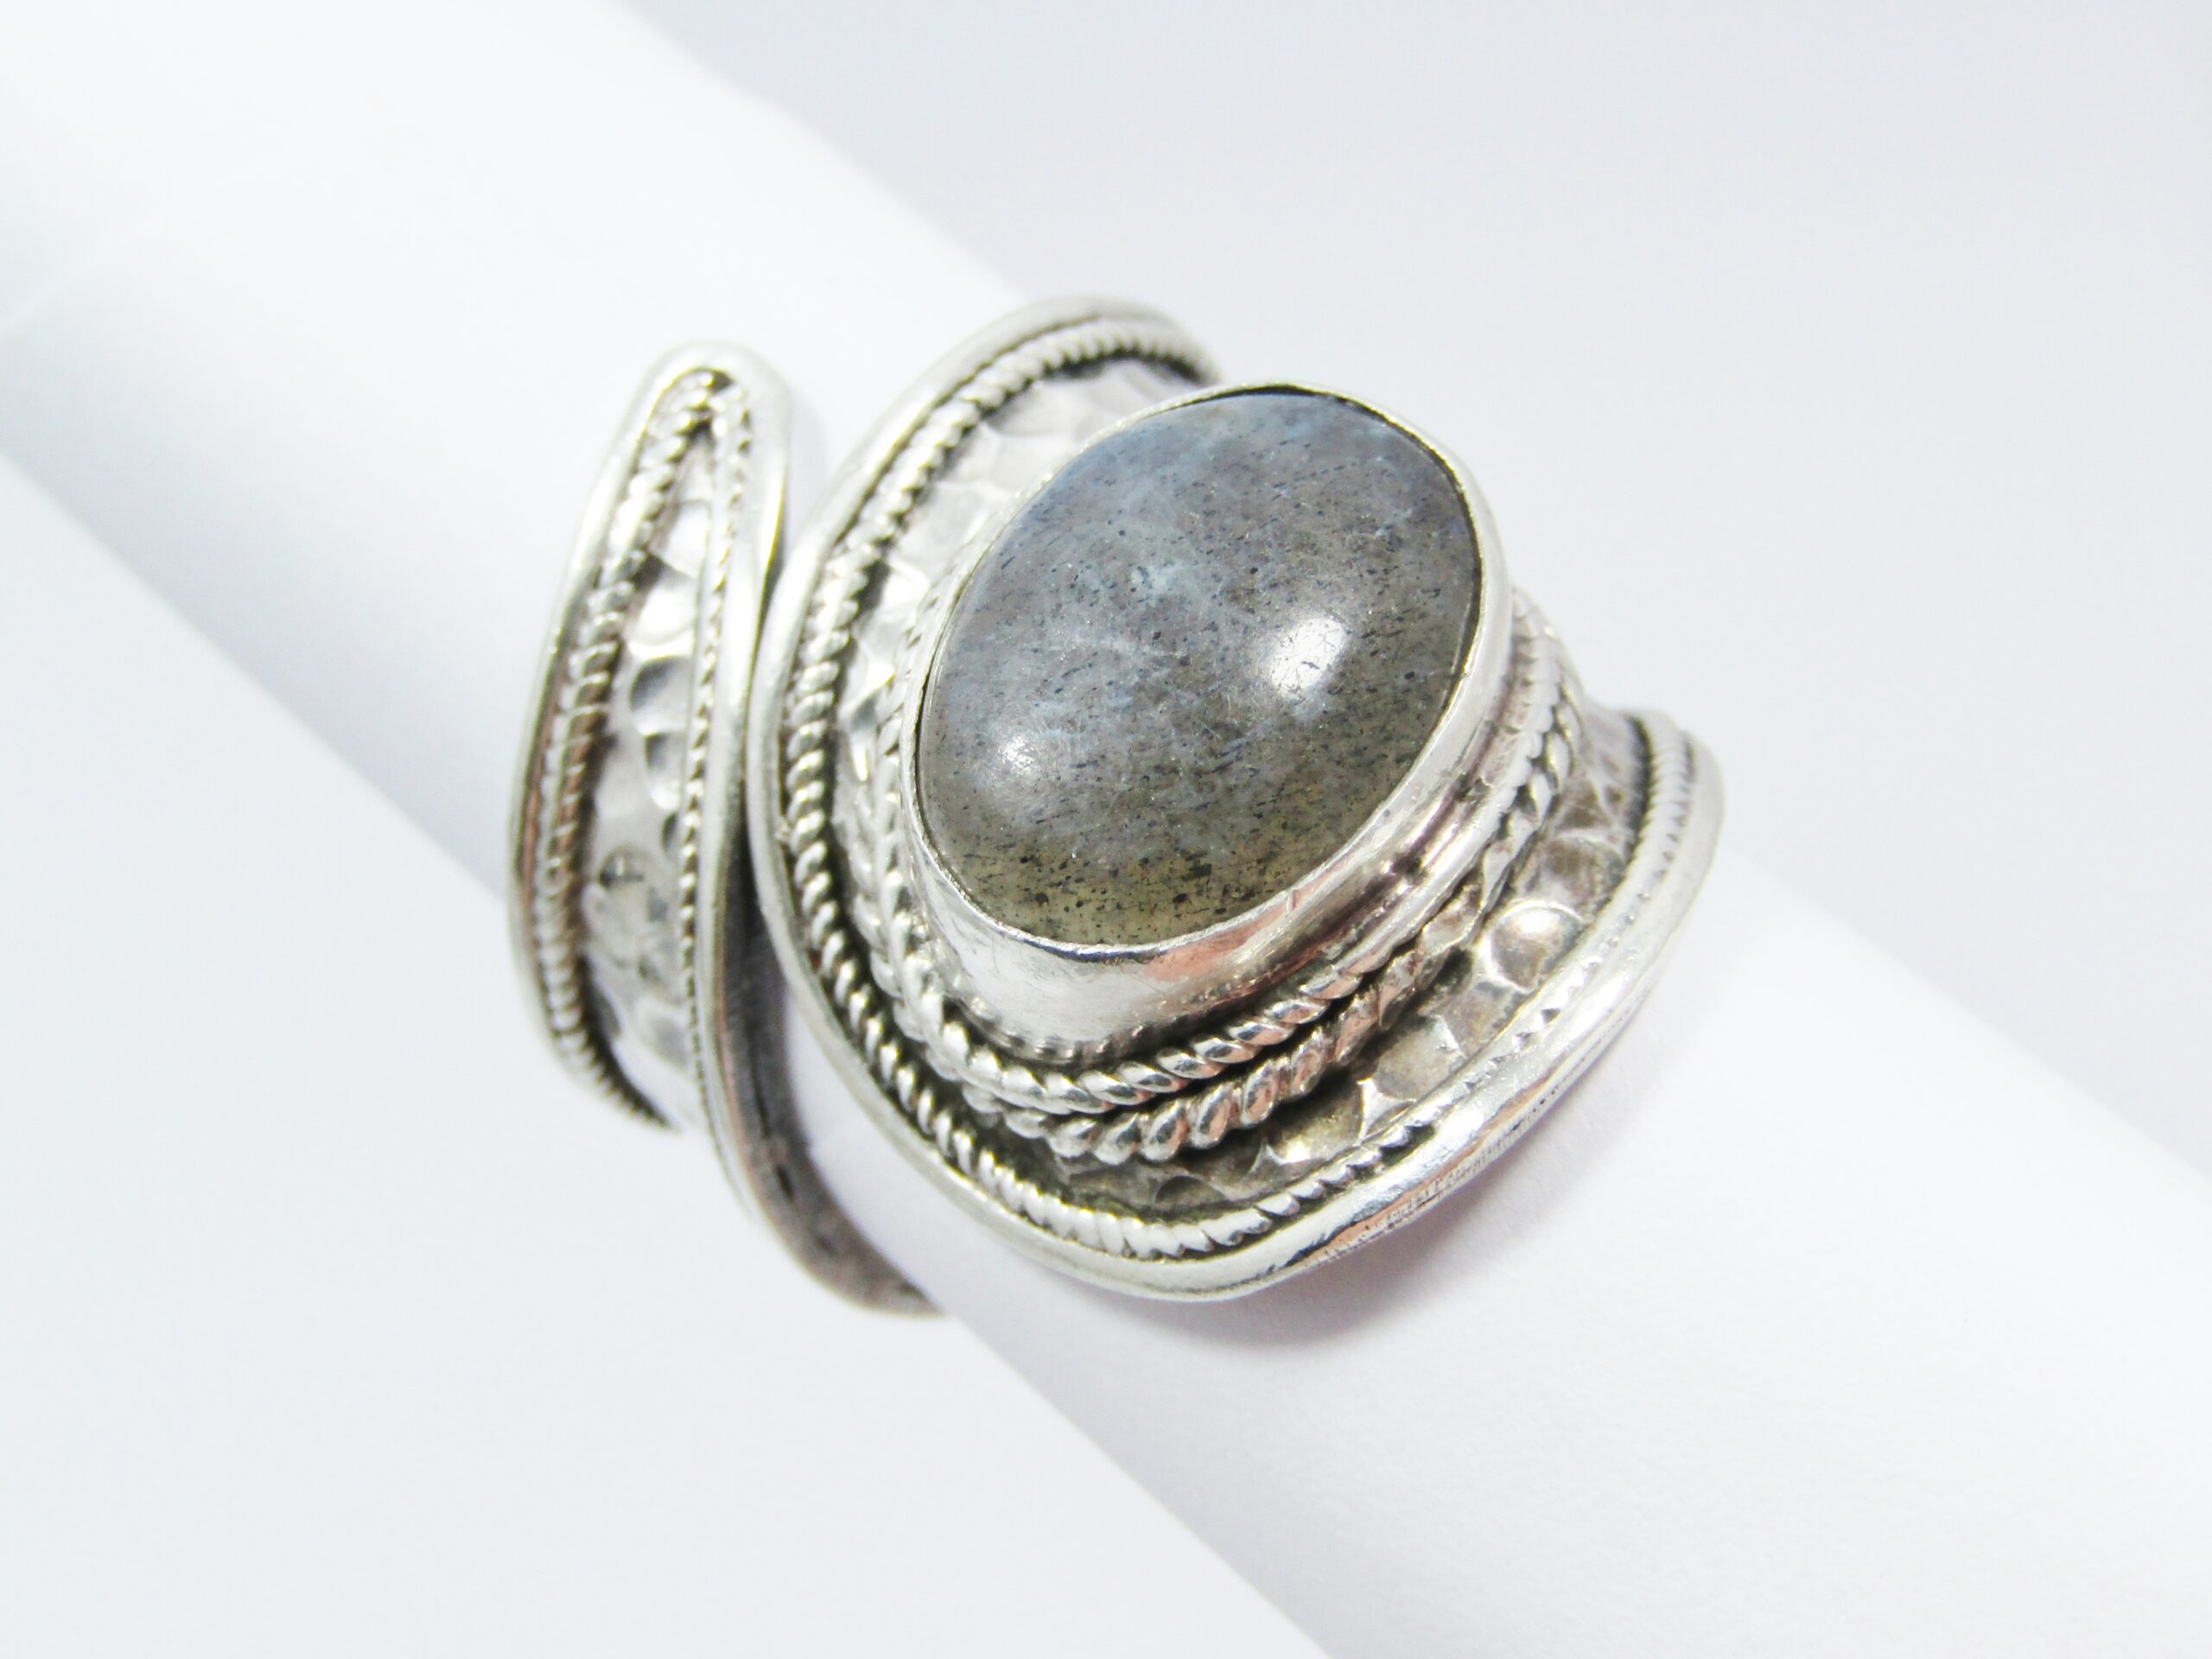 A Lovely Wrap around Band Ring With a Beautiful Labradorite Stone in Sterling Silver